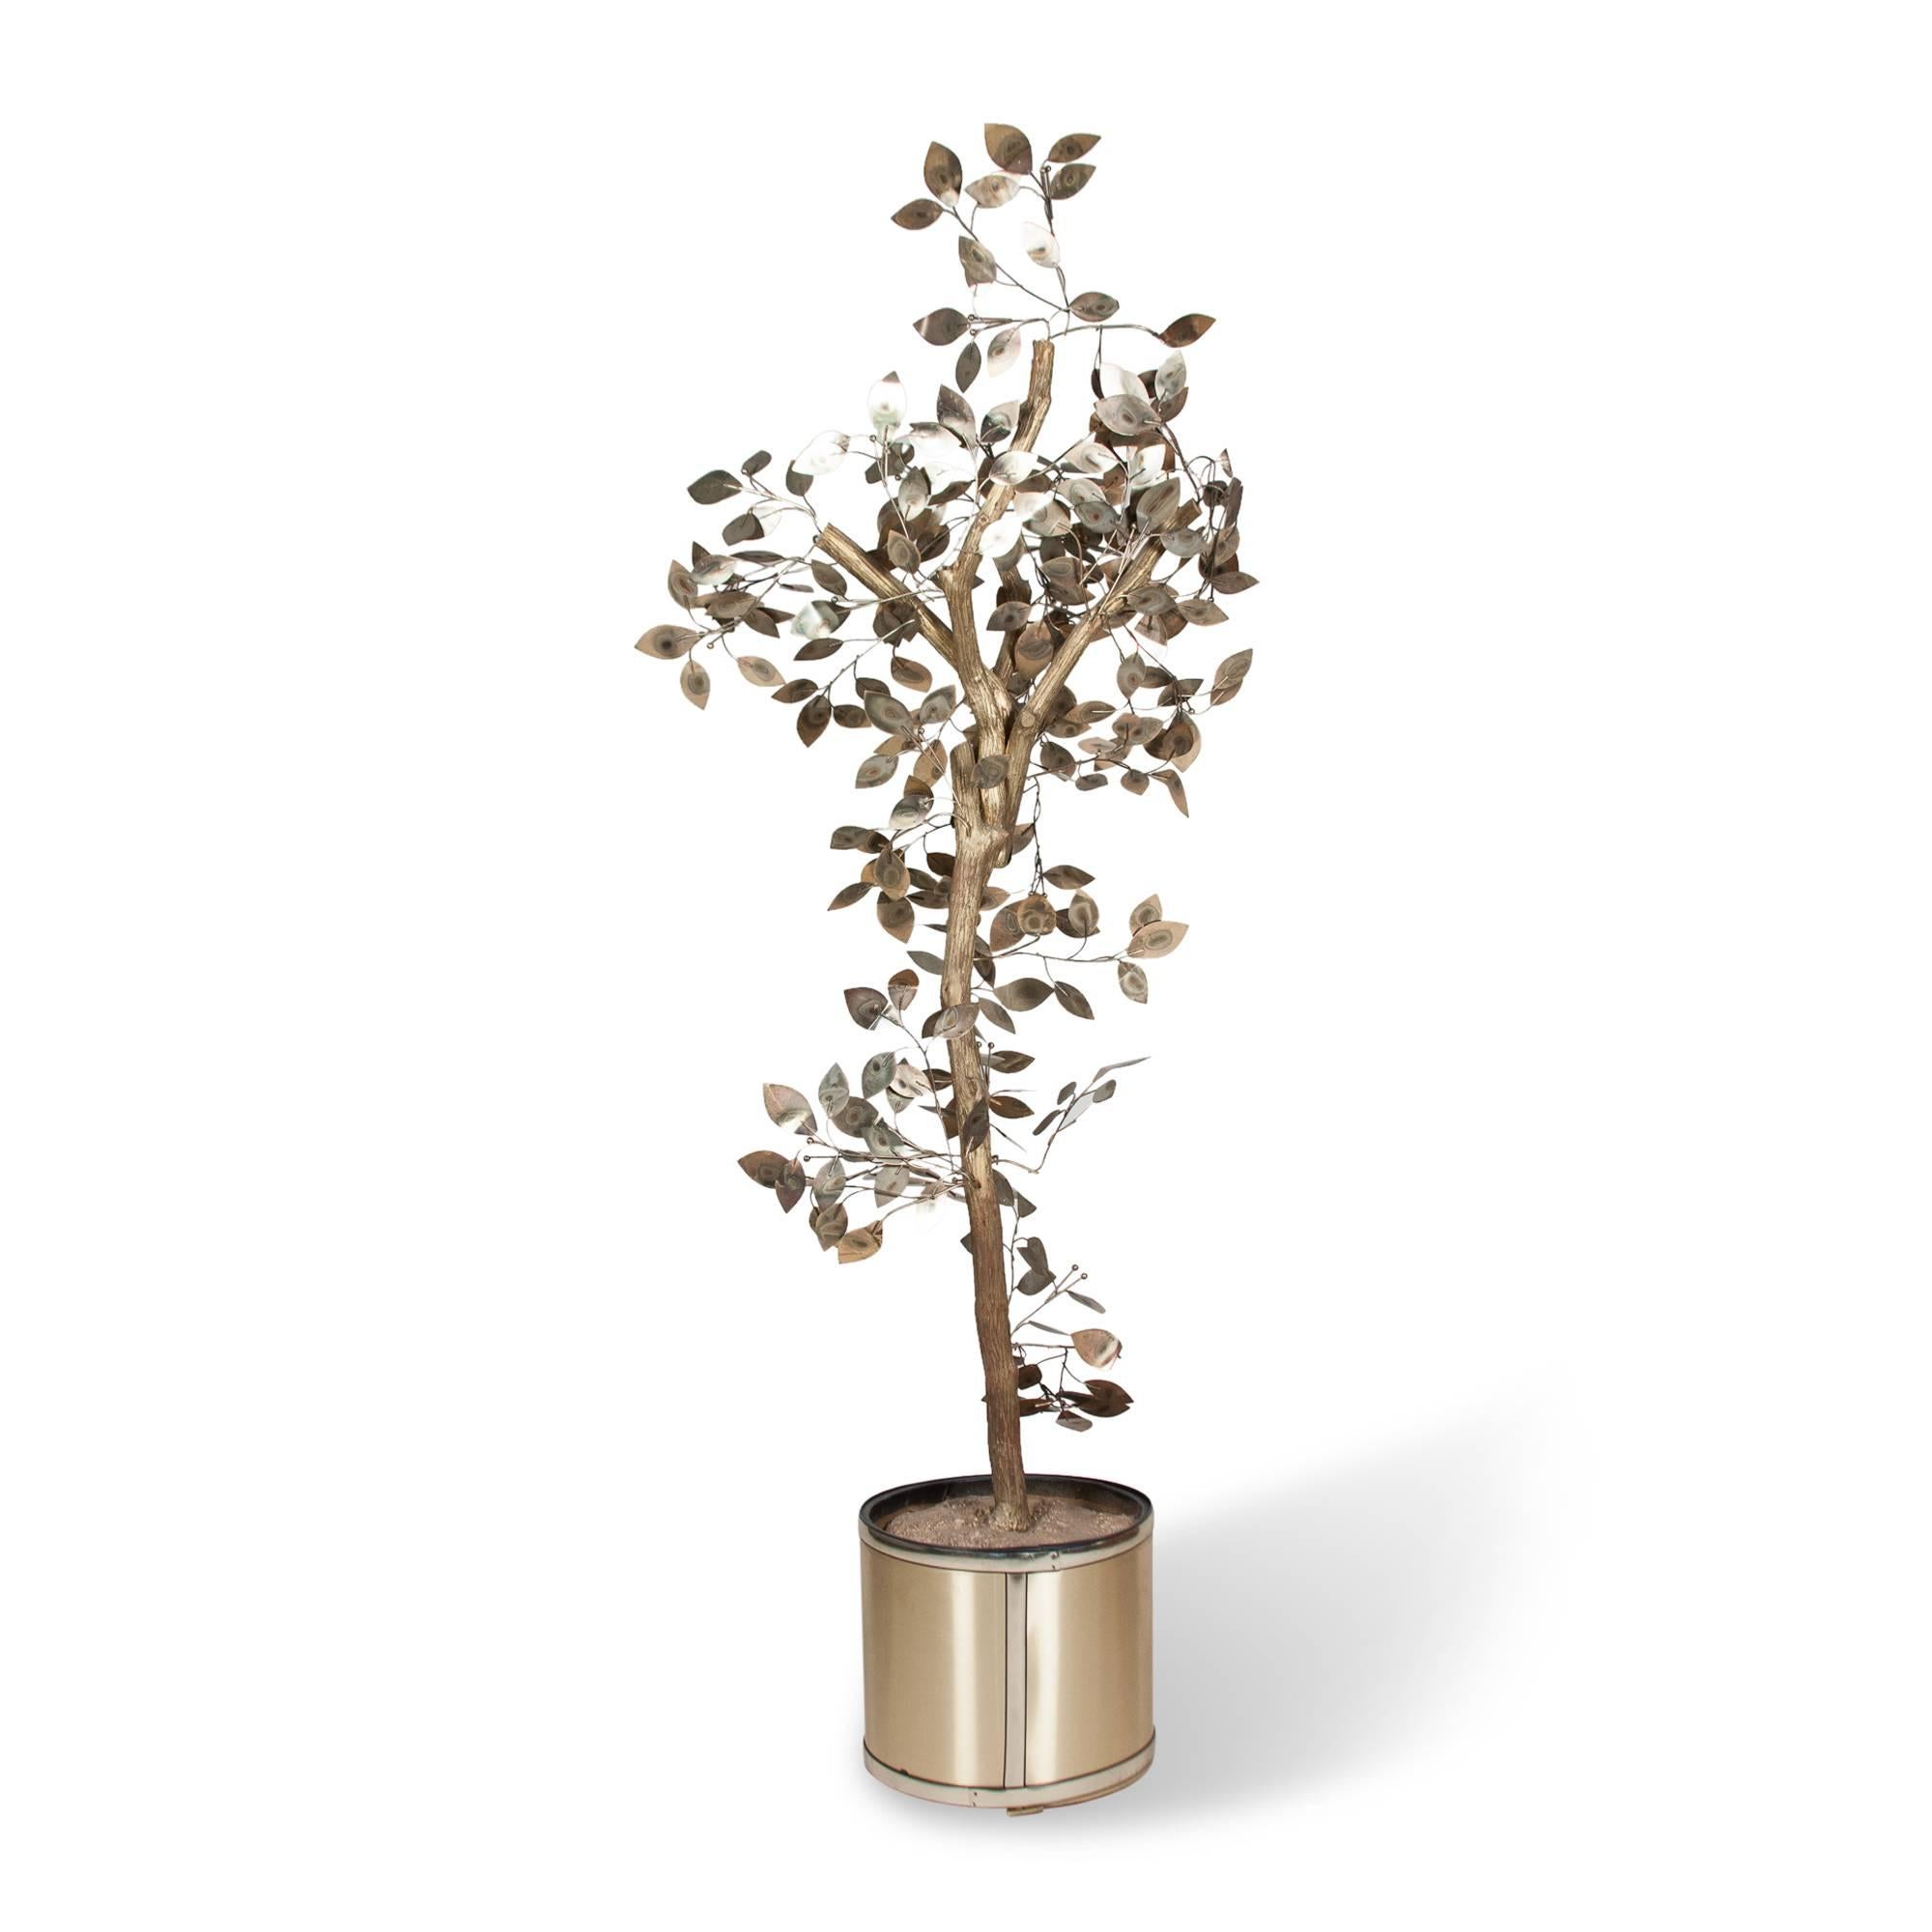 Large brass and gilt painted wood tree sculpture, the leaves in patinated brass, attached to genuine wood tree set into a resin material in a brass cylindrical pot, by C. Jere for Artisan House, America, early 1970s. Measure: Height 6 feet. (Item